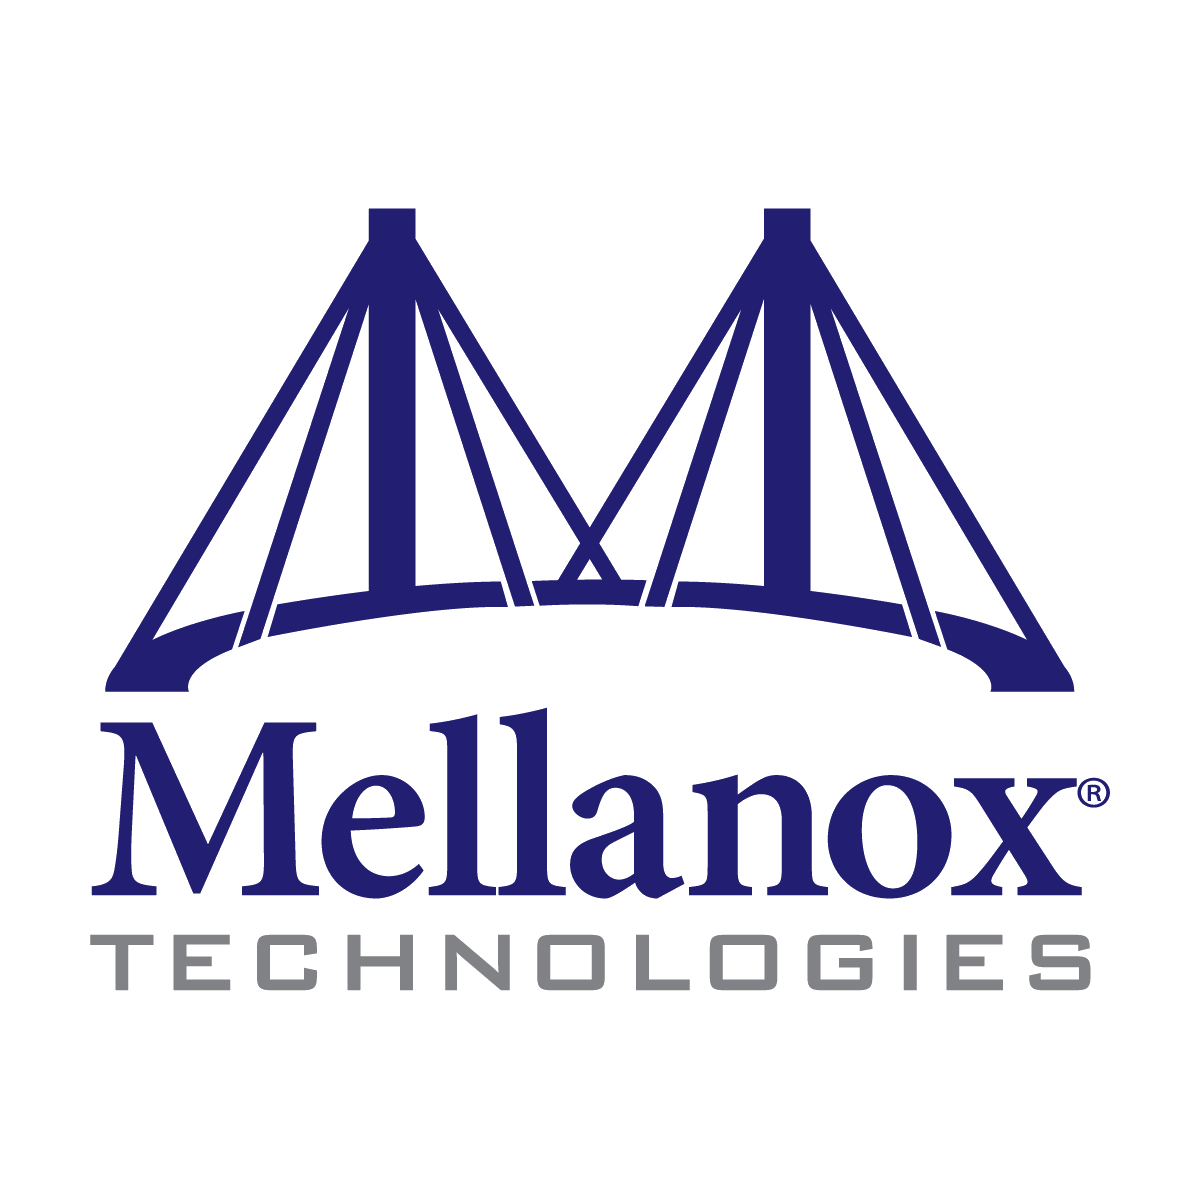 Mellanox Spectrum(R) Based 25GbE/100GbE 1U Open Ethernet Switch With Onyx, 18 SFP28 And 4 QSFP28 Ports, 2 Power Supplies (Ac), X86 Cpu, Short Depth, P2C Airflow, Rail Kit Must Be Purchased Separately